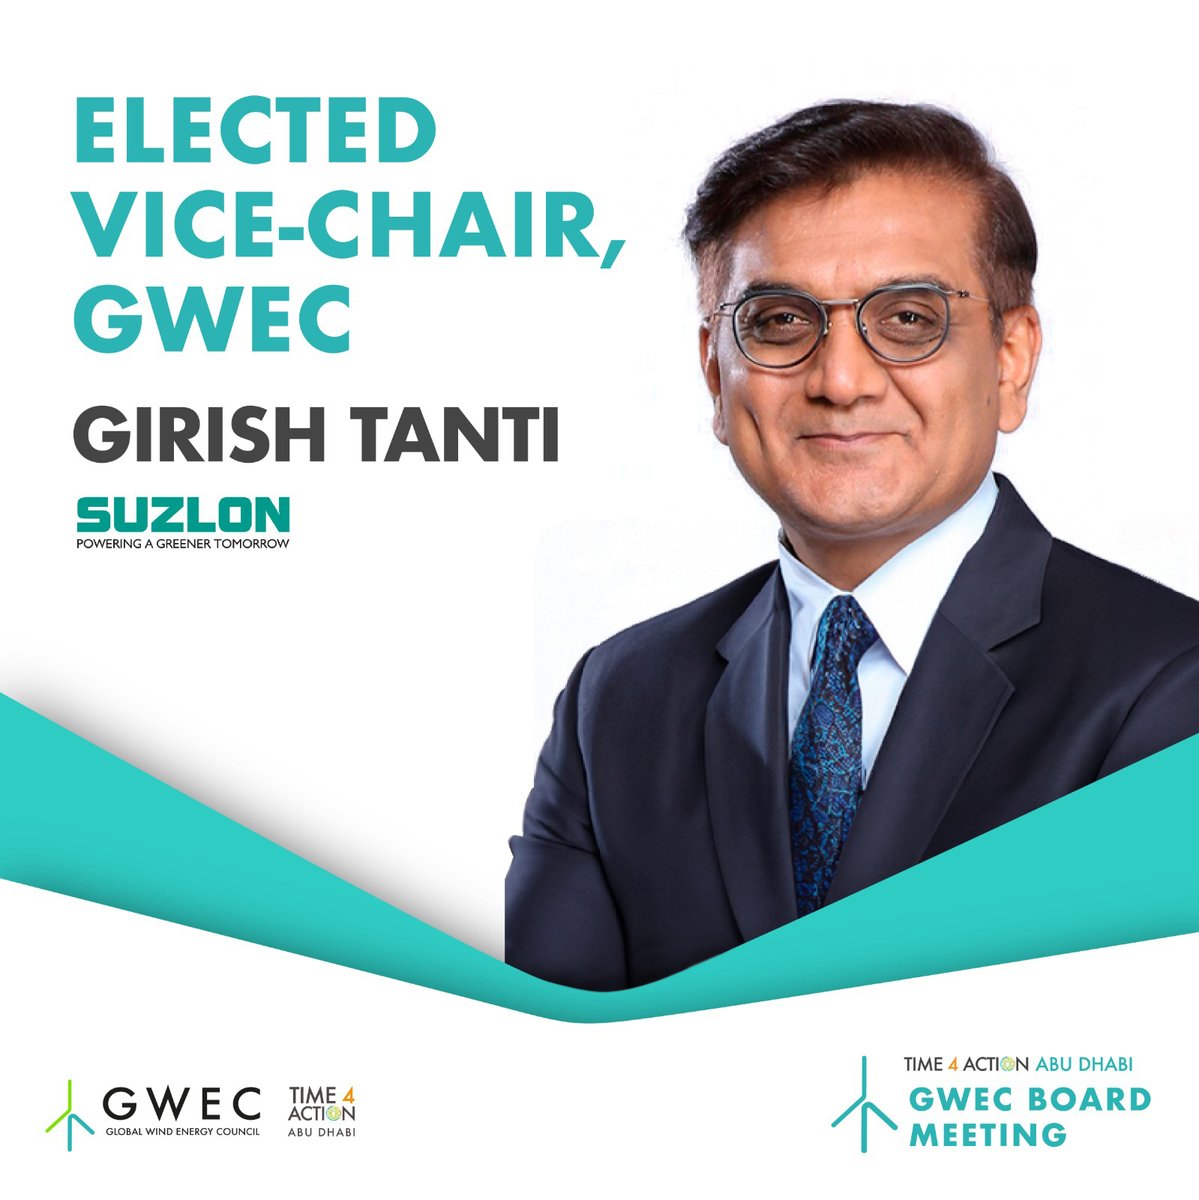 A moment of pride for all of us as Mr. Girish Tanti, Vice-Chairman of Suzlon Group, has been elected as Vice-Chair of Global Wind Energy Council (GWEC). We Congratulate him and look forward to witnessing the global wind industry reach new heights under his leadership.

Know More: